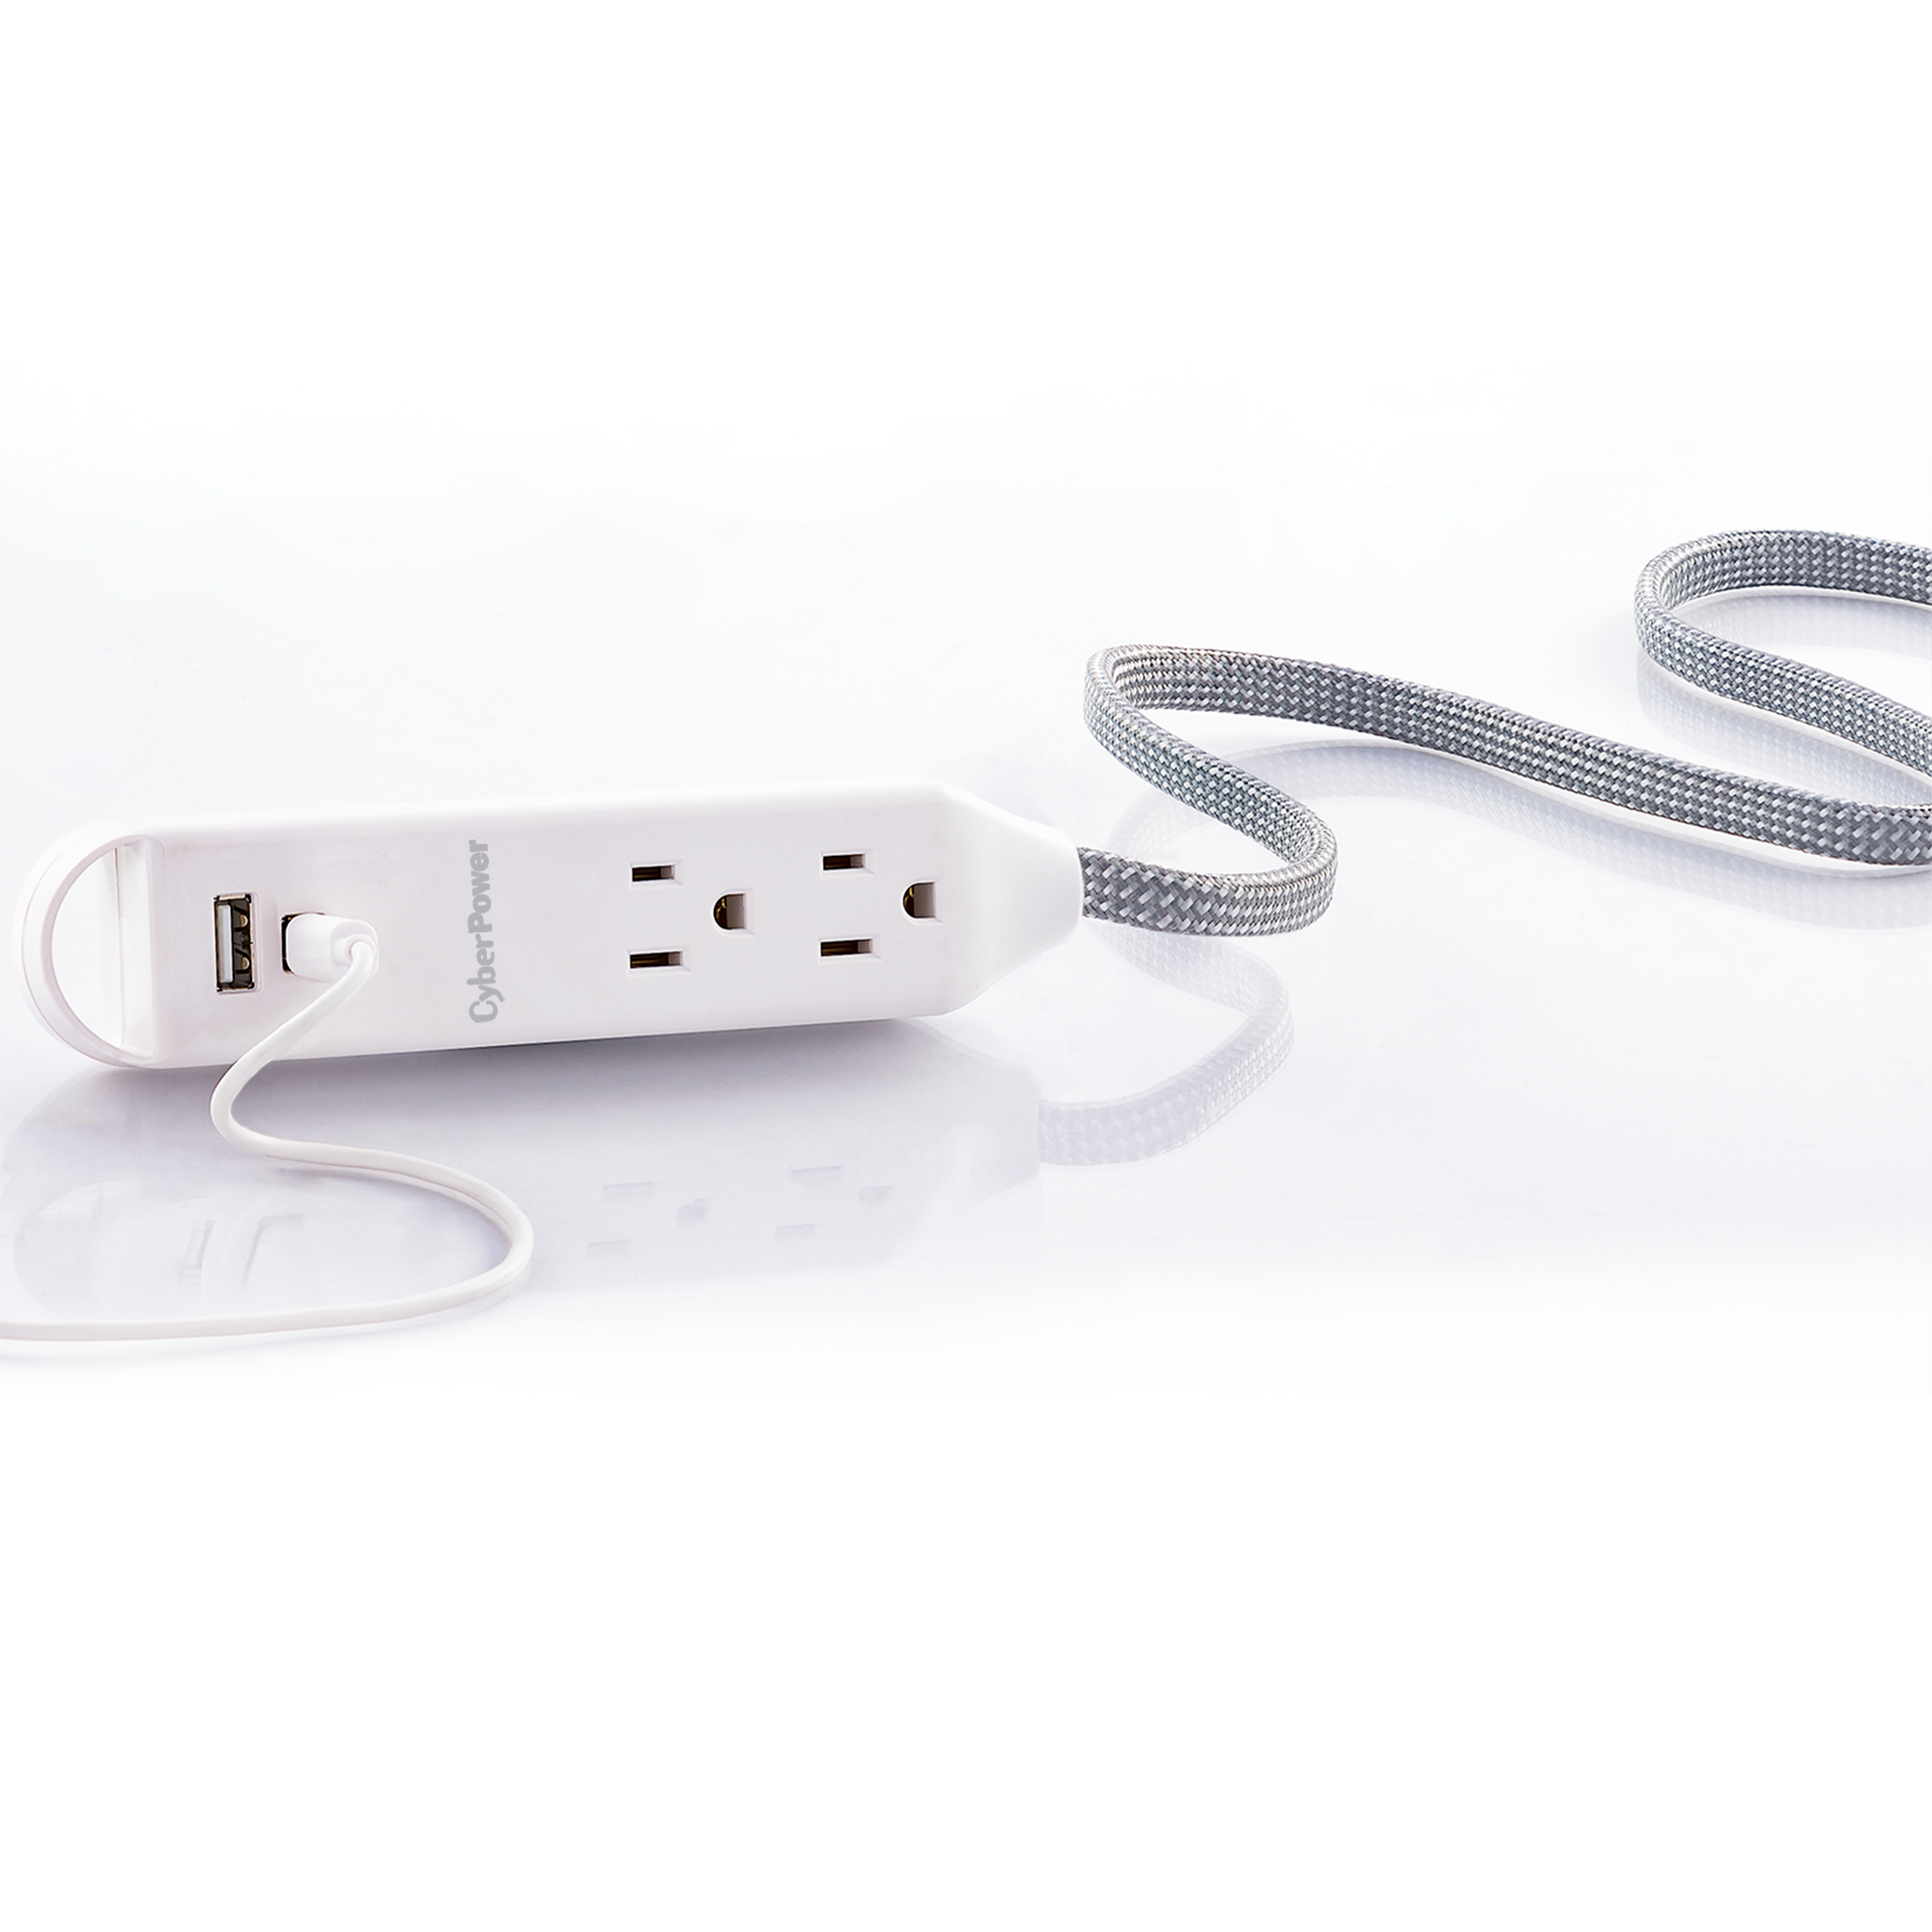 GC306UCHD - 3 Outlet Surge Protector Extension Cord With USB